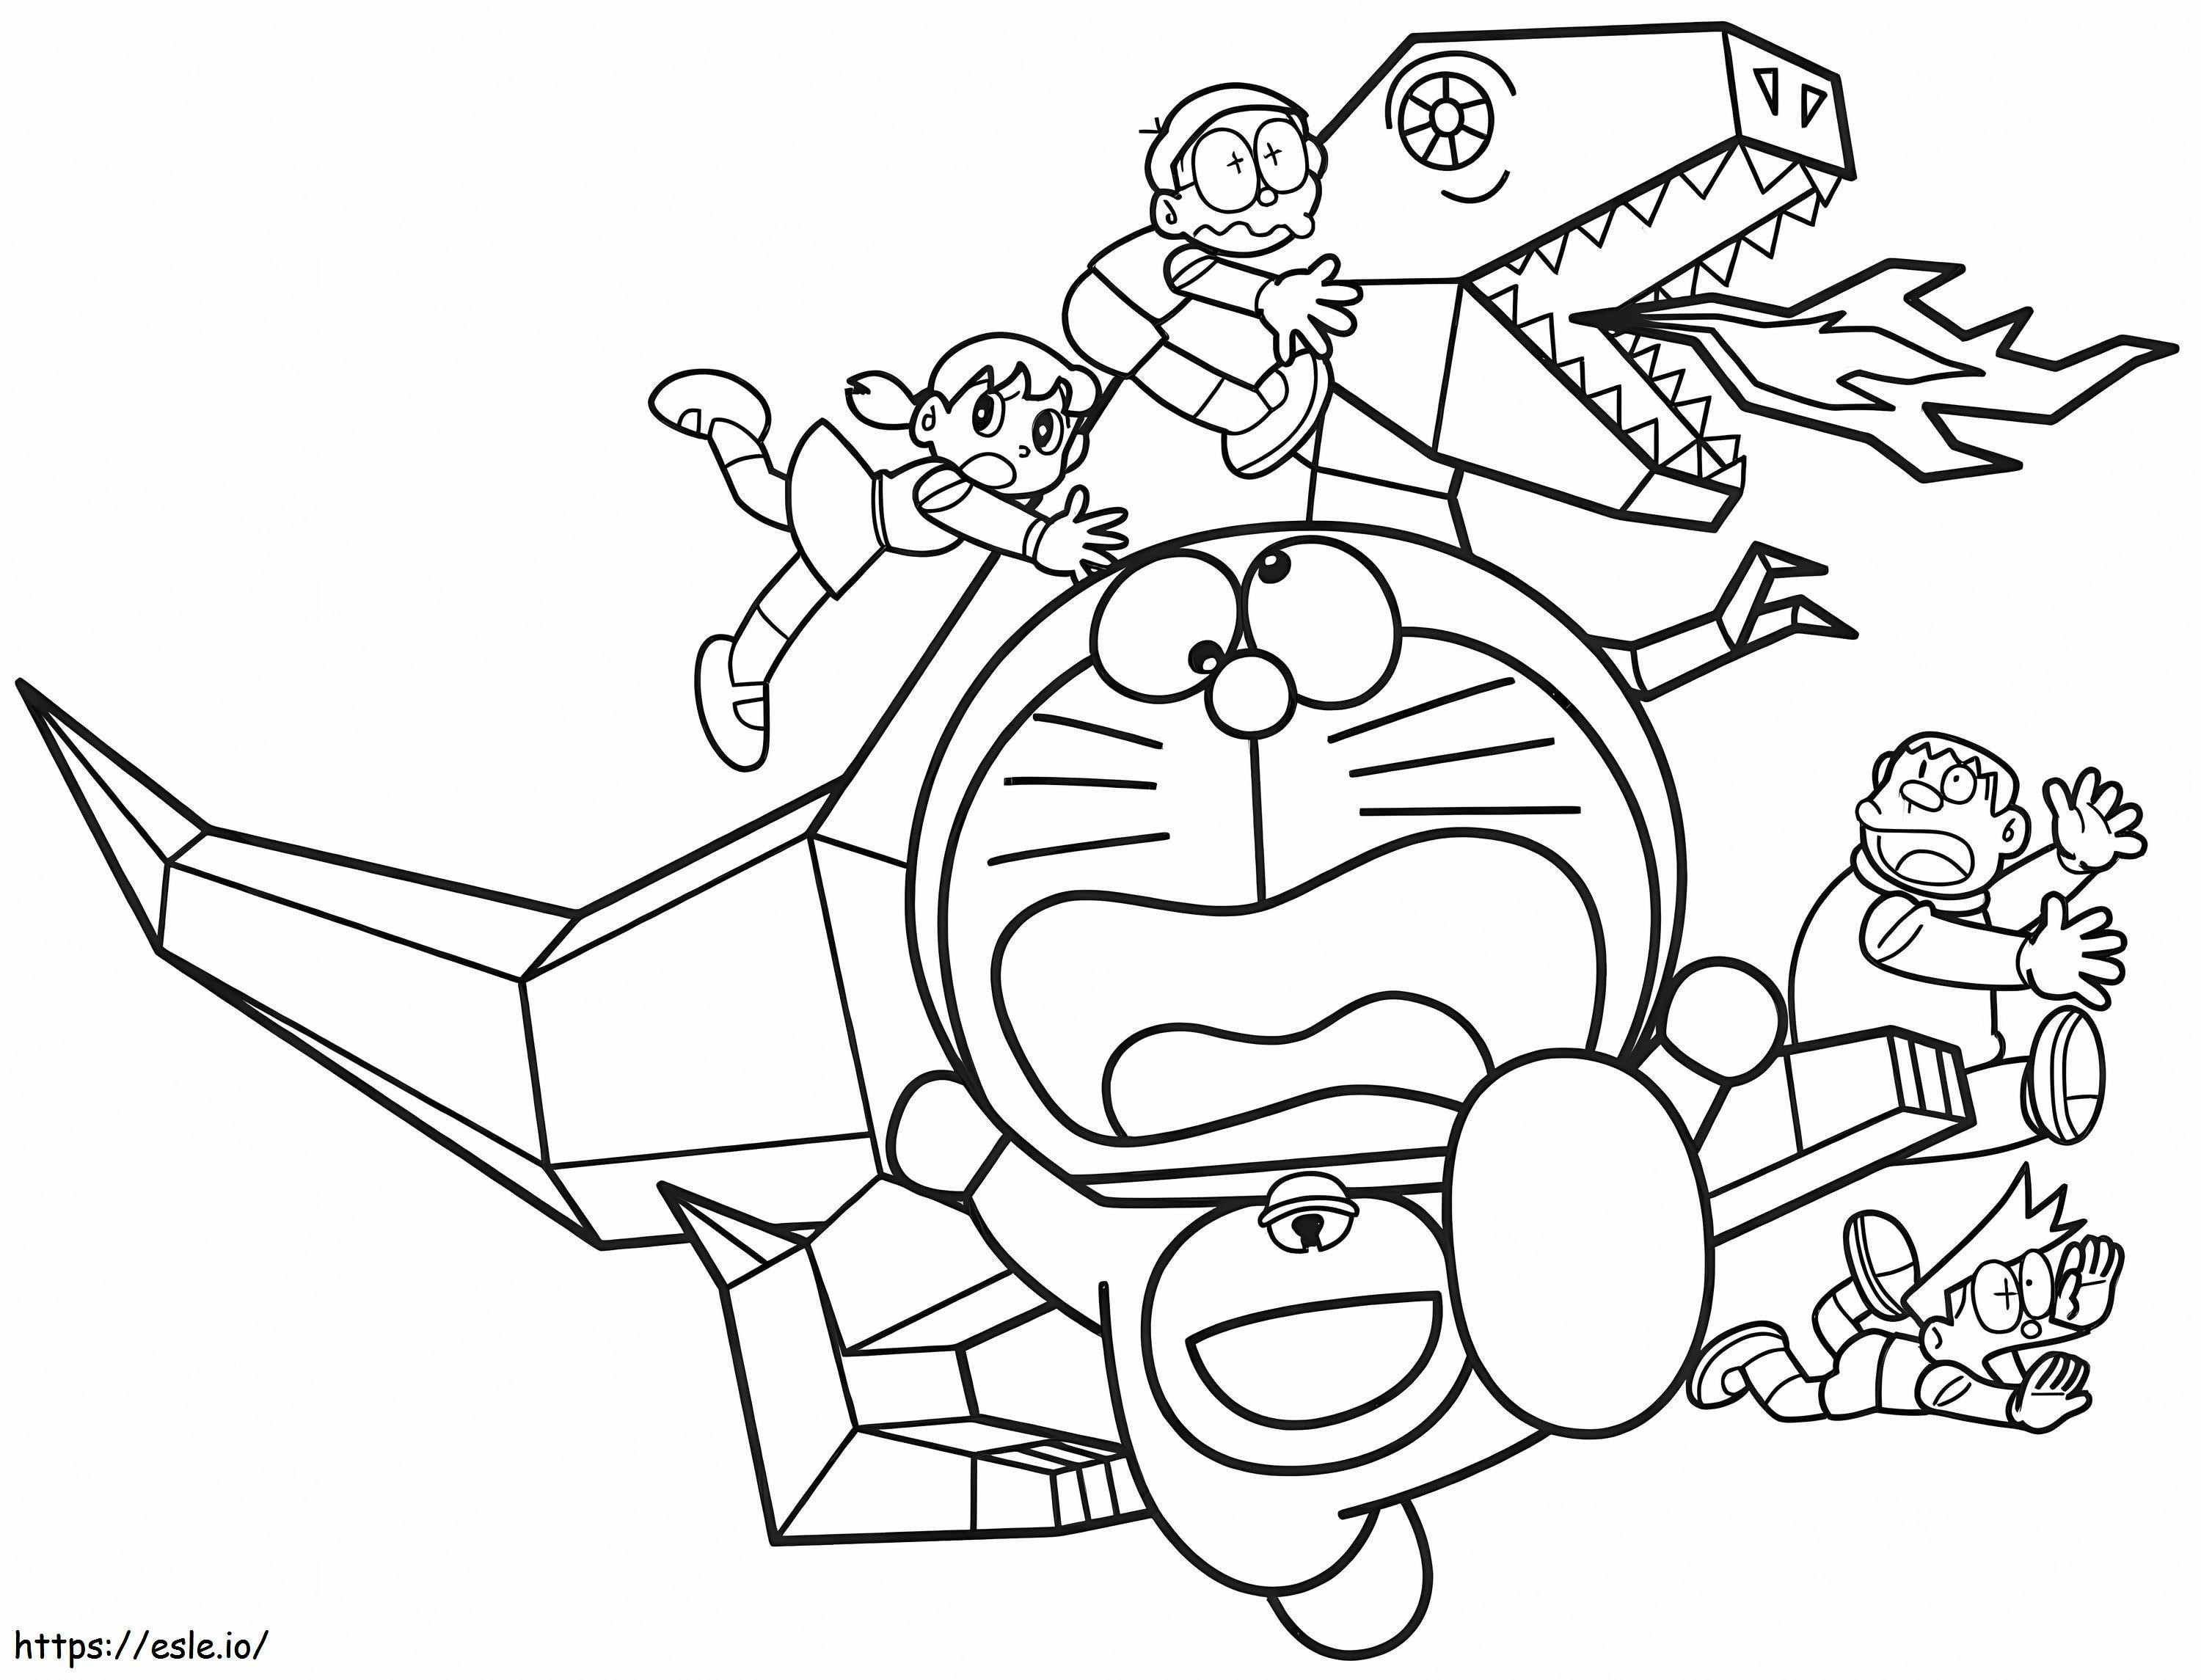 1540782387 Cartoon Doraemon And Friends Amp Printable Coloring coloring page